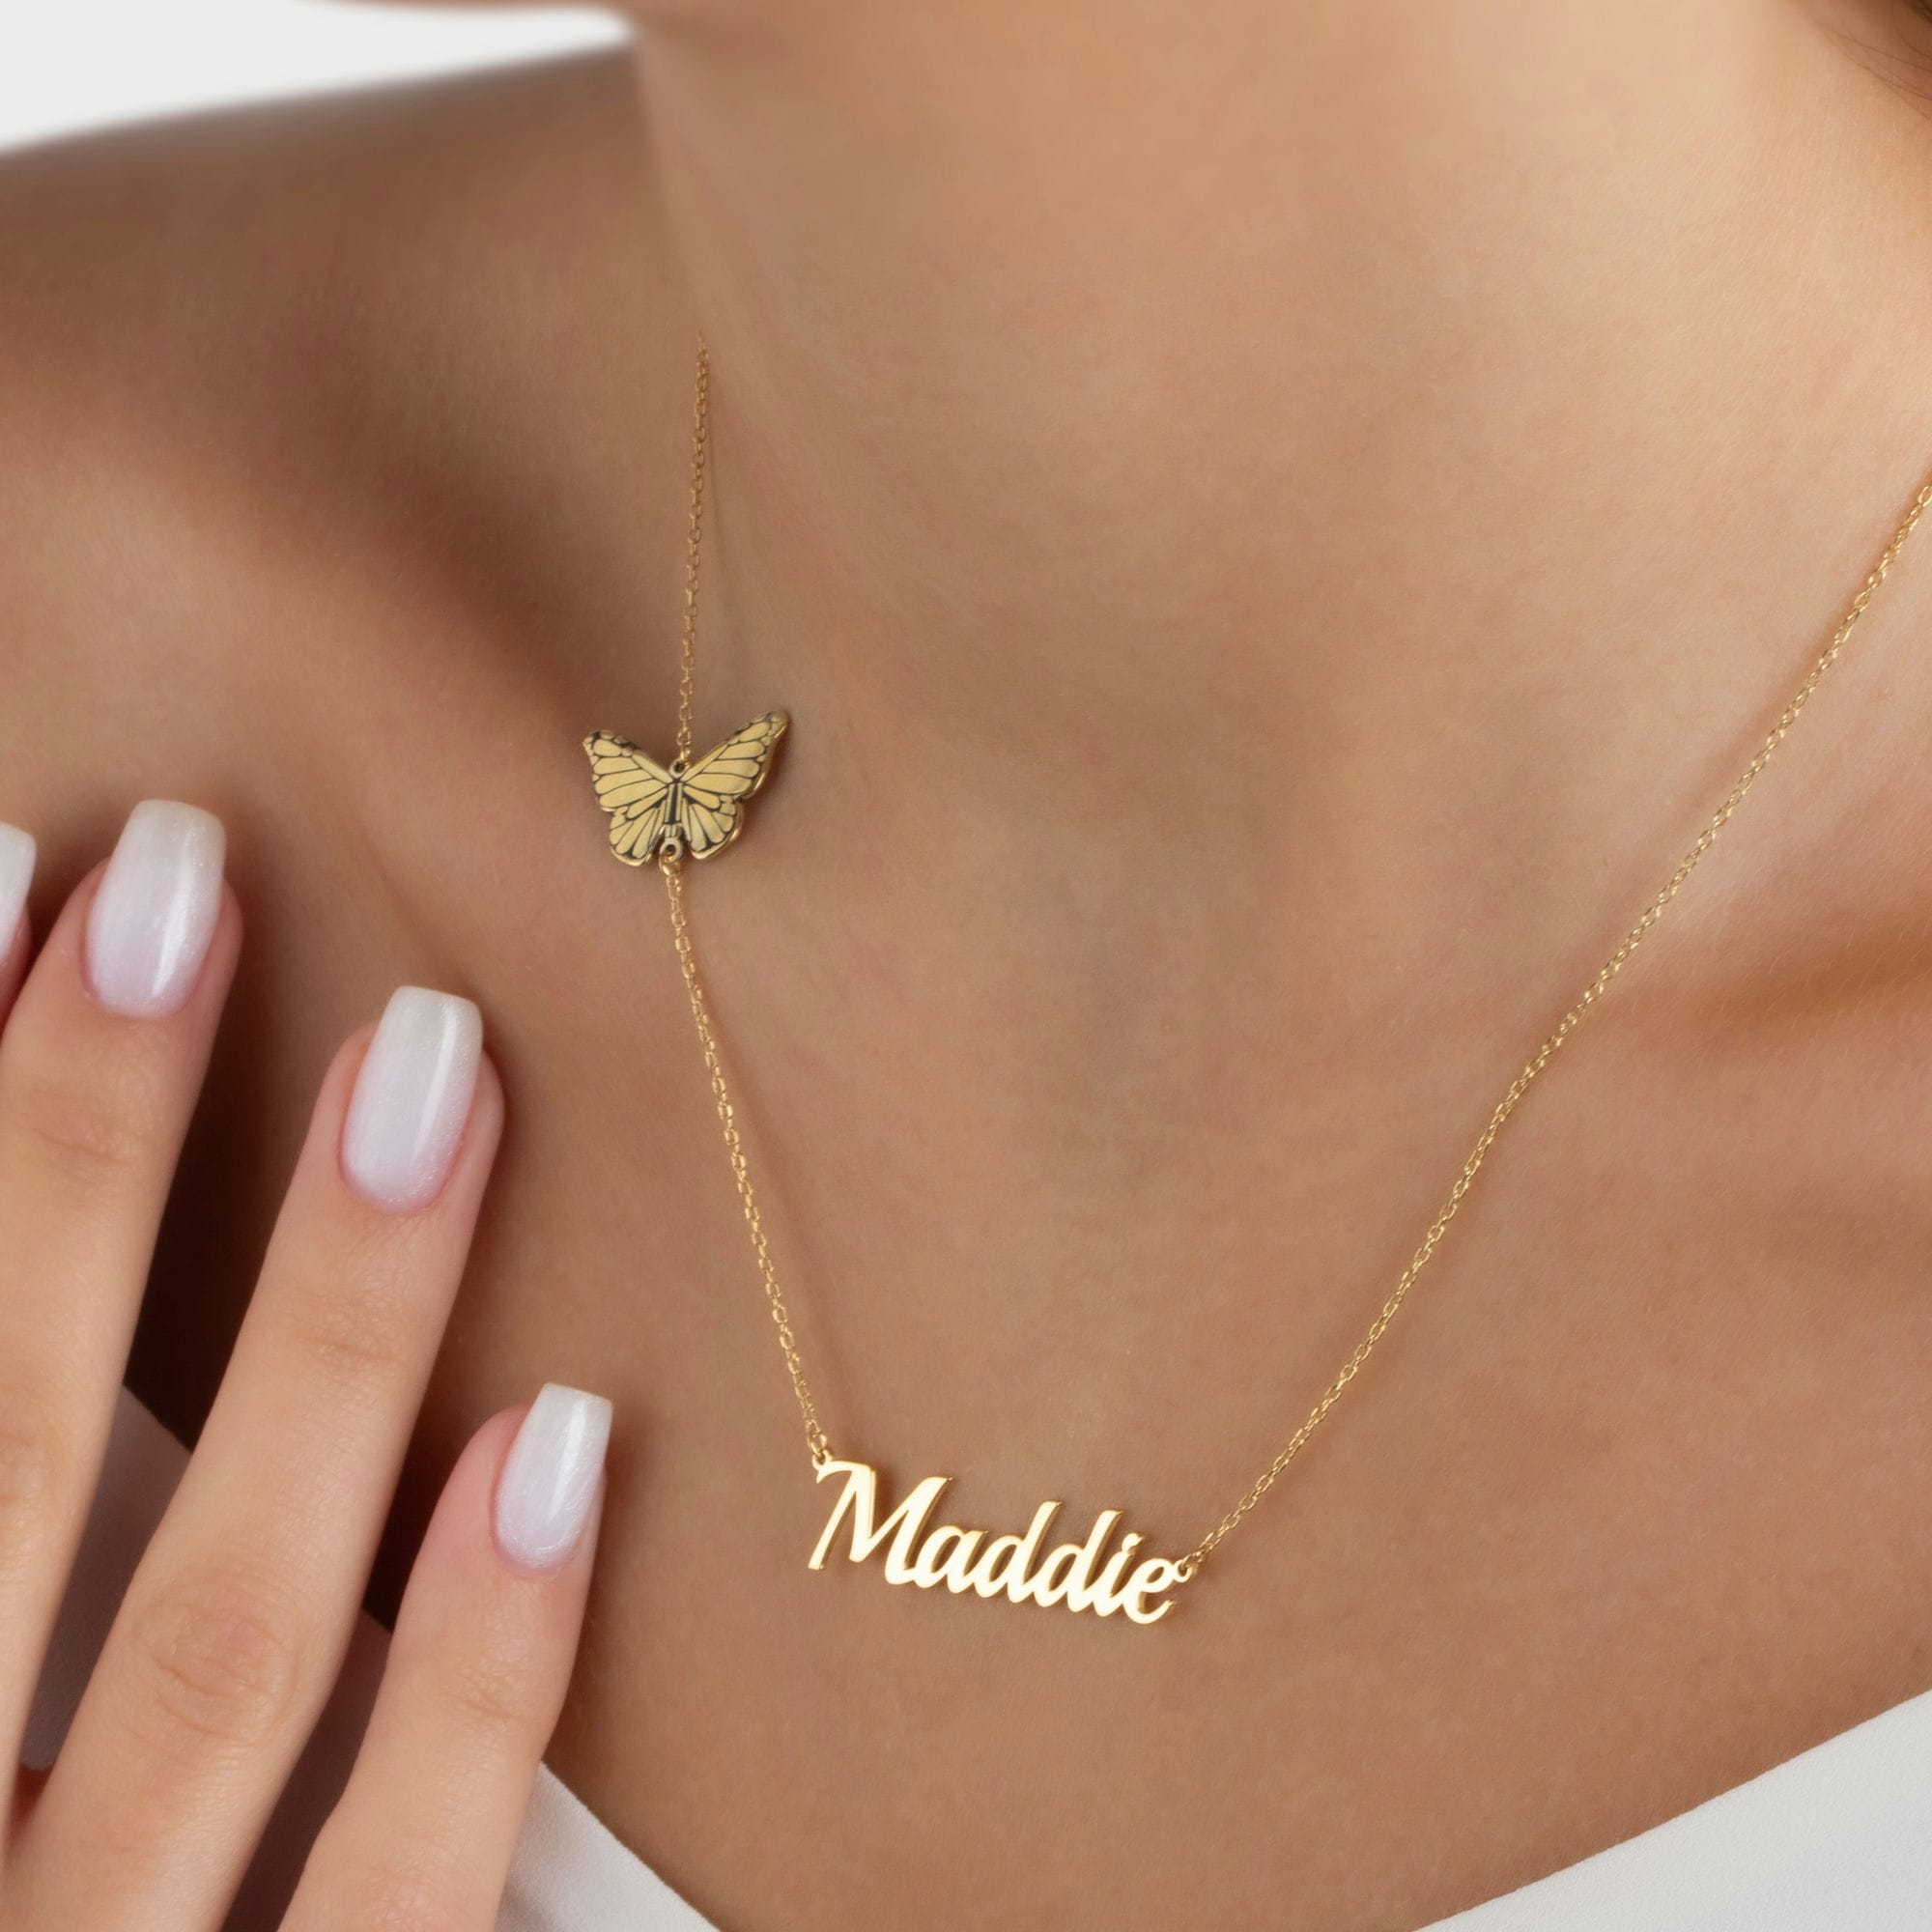 Name Necklace With Birth Butterfly